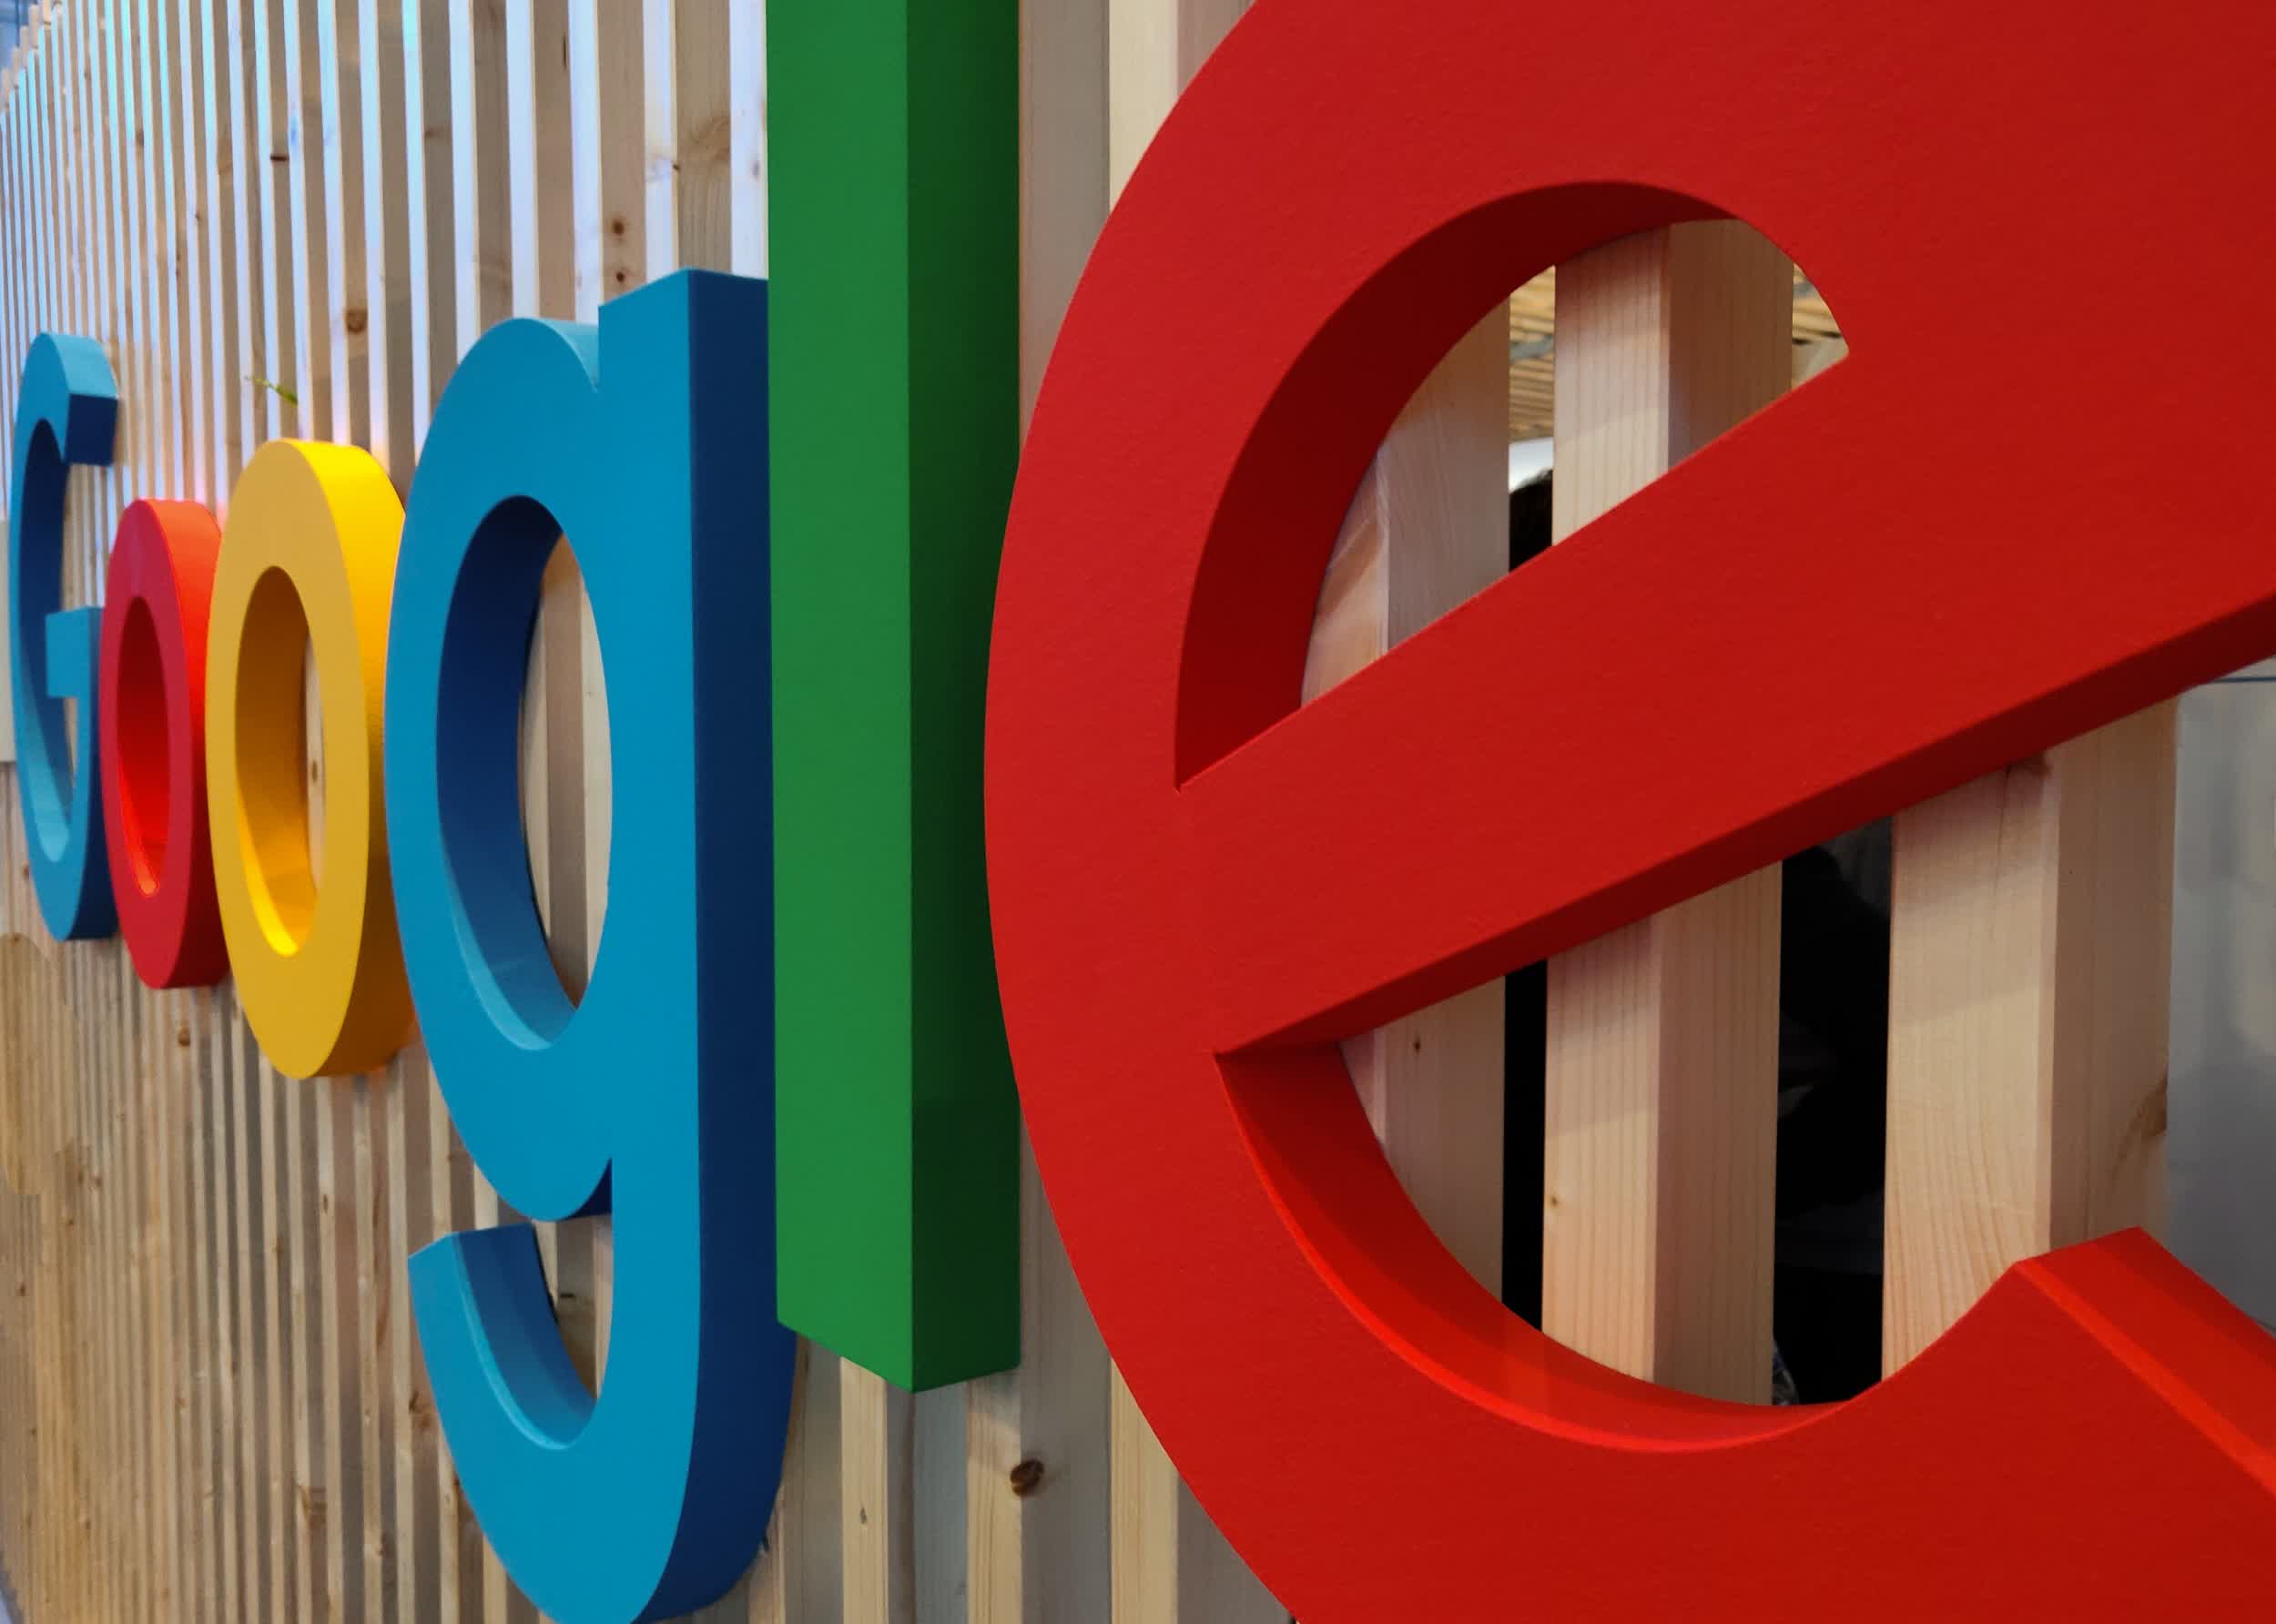 Texas sues Google over allegations it captures people's biometric data without consent